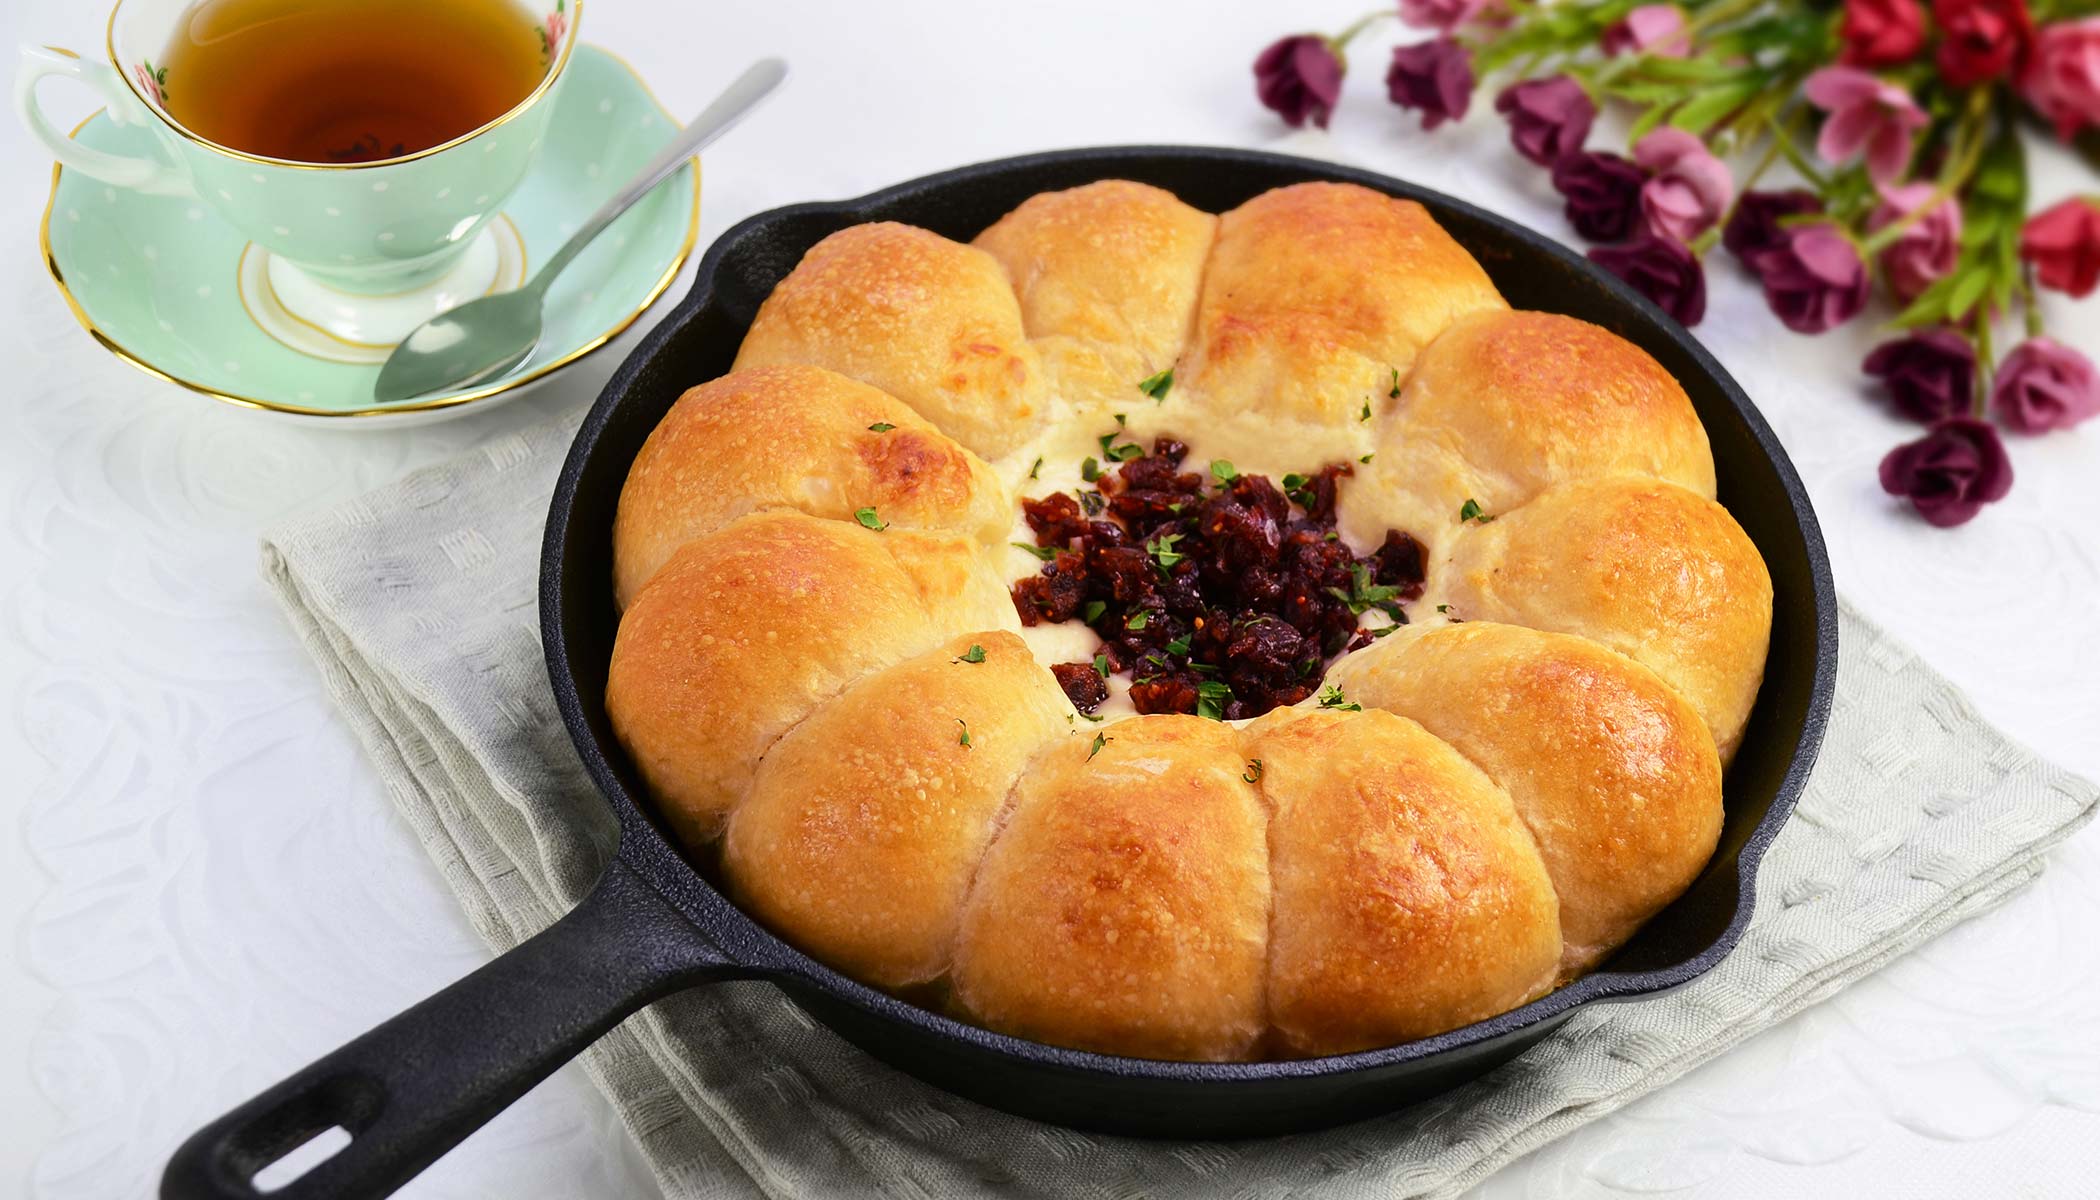 Zojirushi Recipe – Skillet Bread with Cranberry Cheese Dip